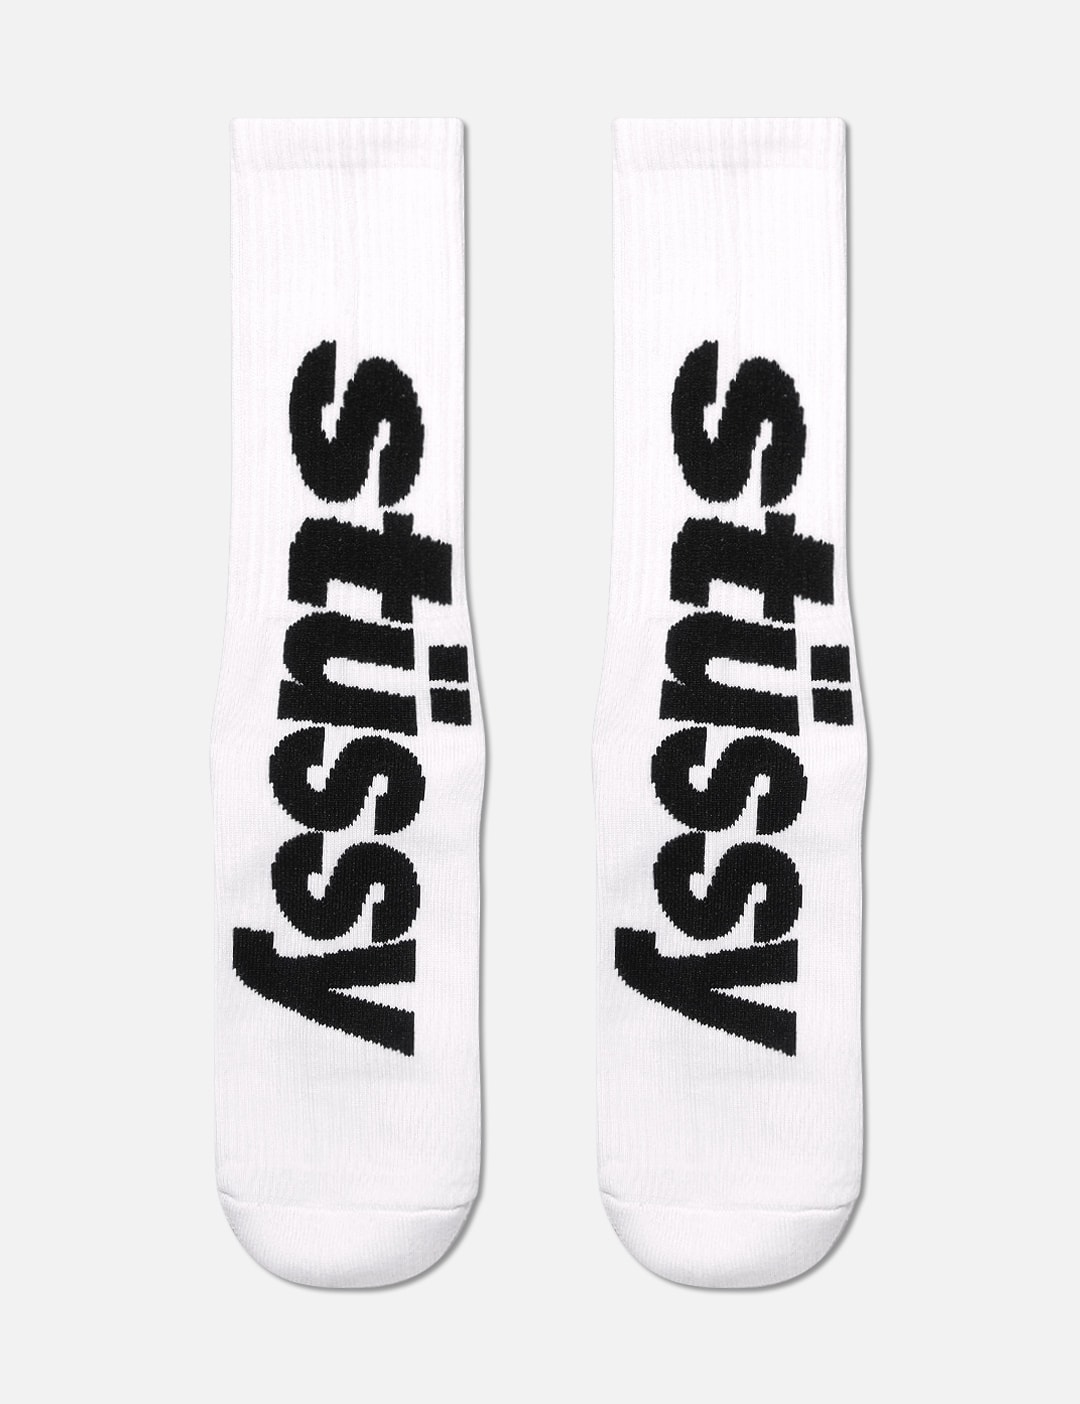 Stüssy - Big Helvetica Crew Socks | HBX - Globally Curated Fashion and  Lifestyle by Hypebeast